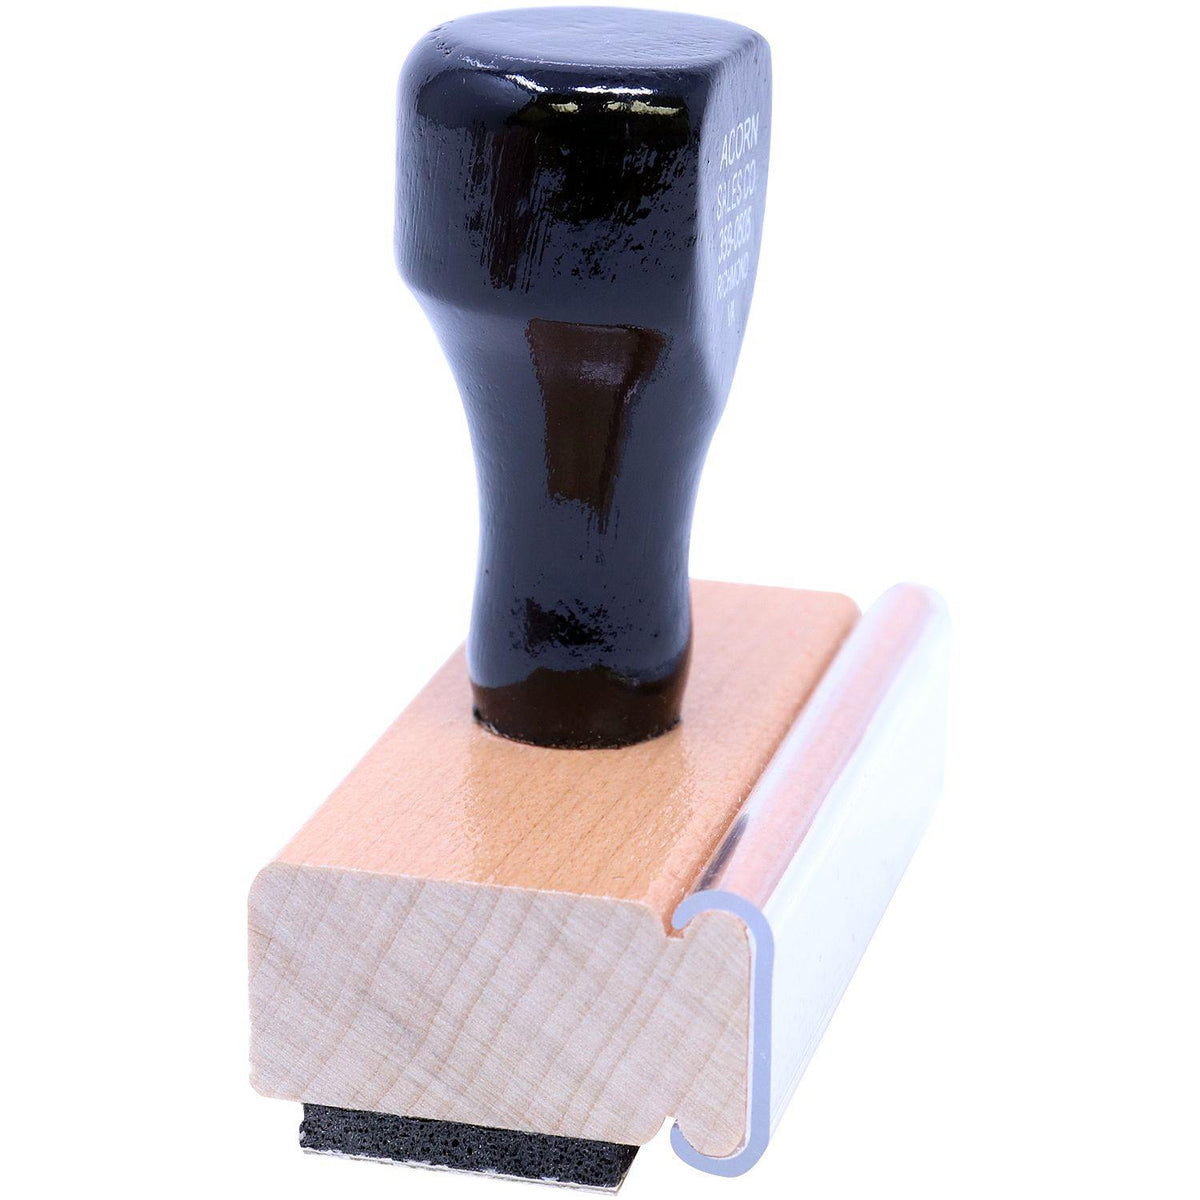 Side View of Large Closed Account Rubber Stamp at an Angle